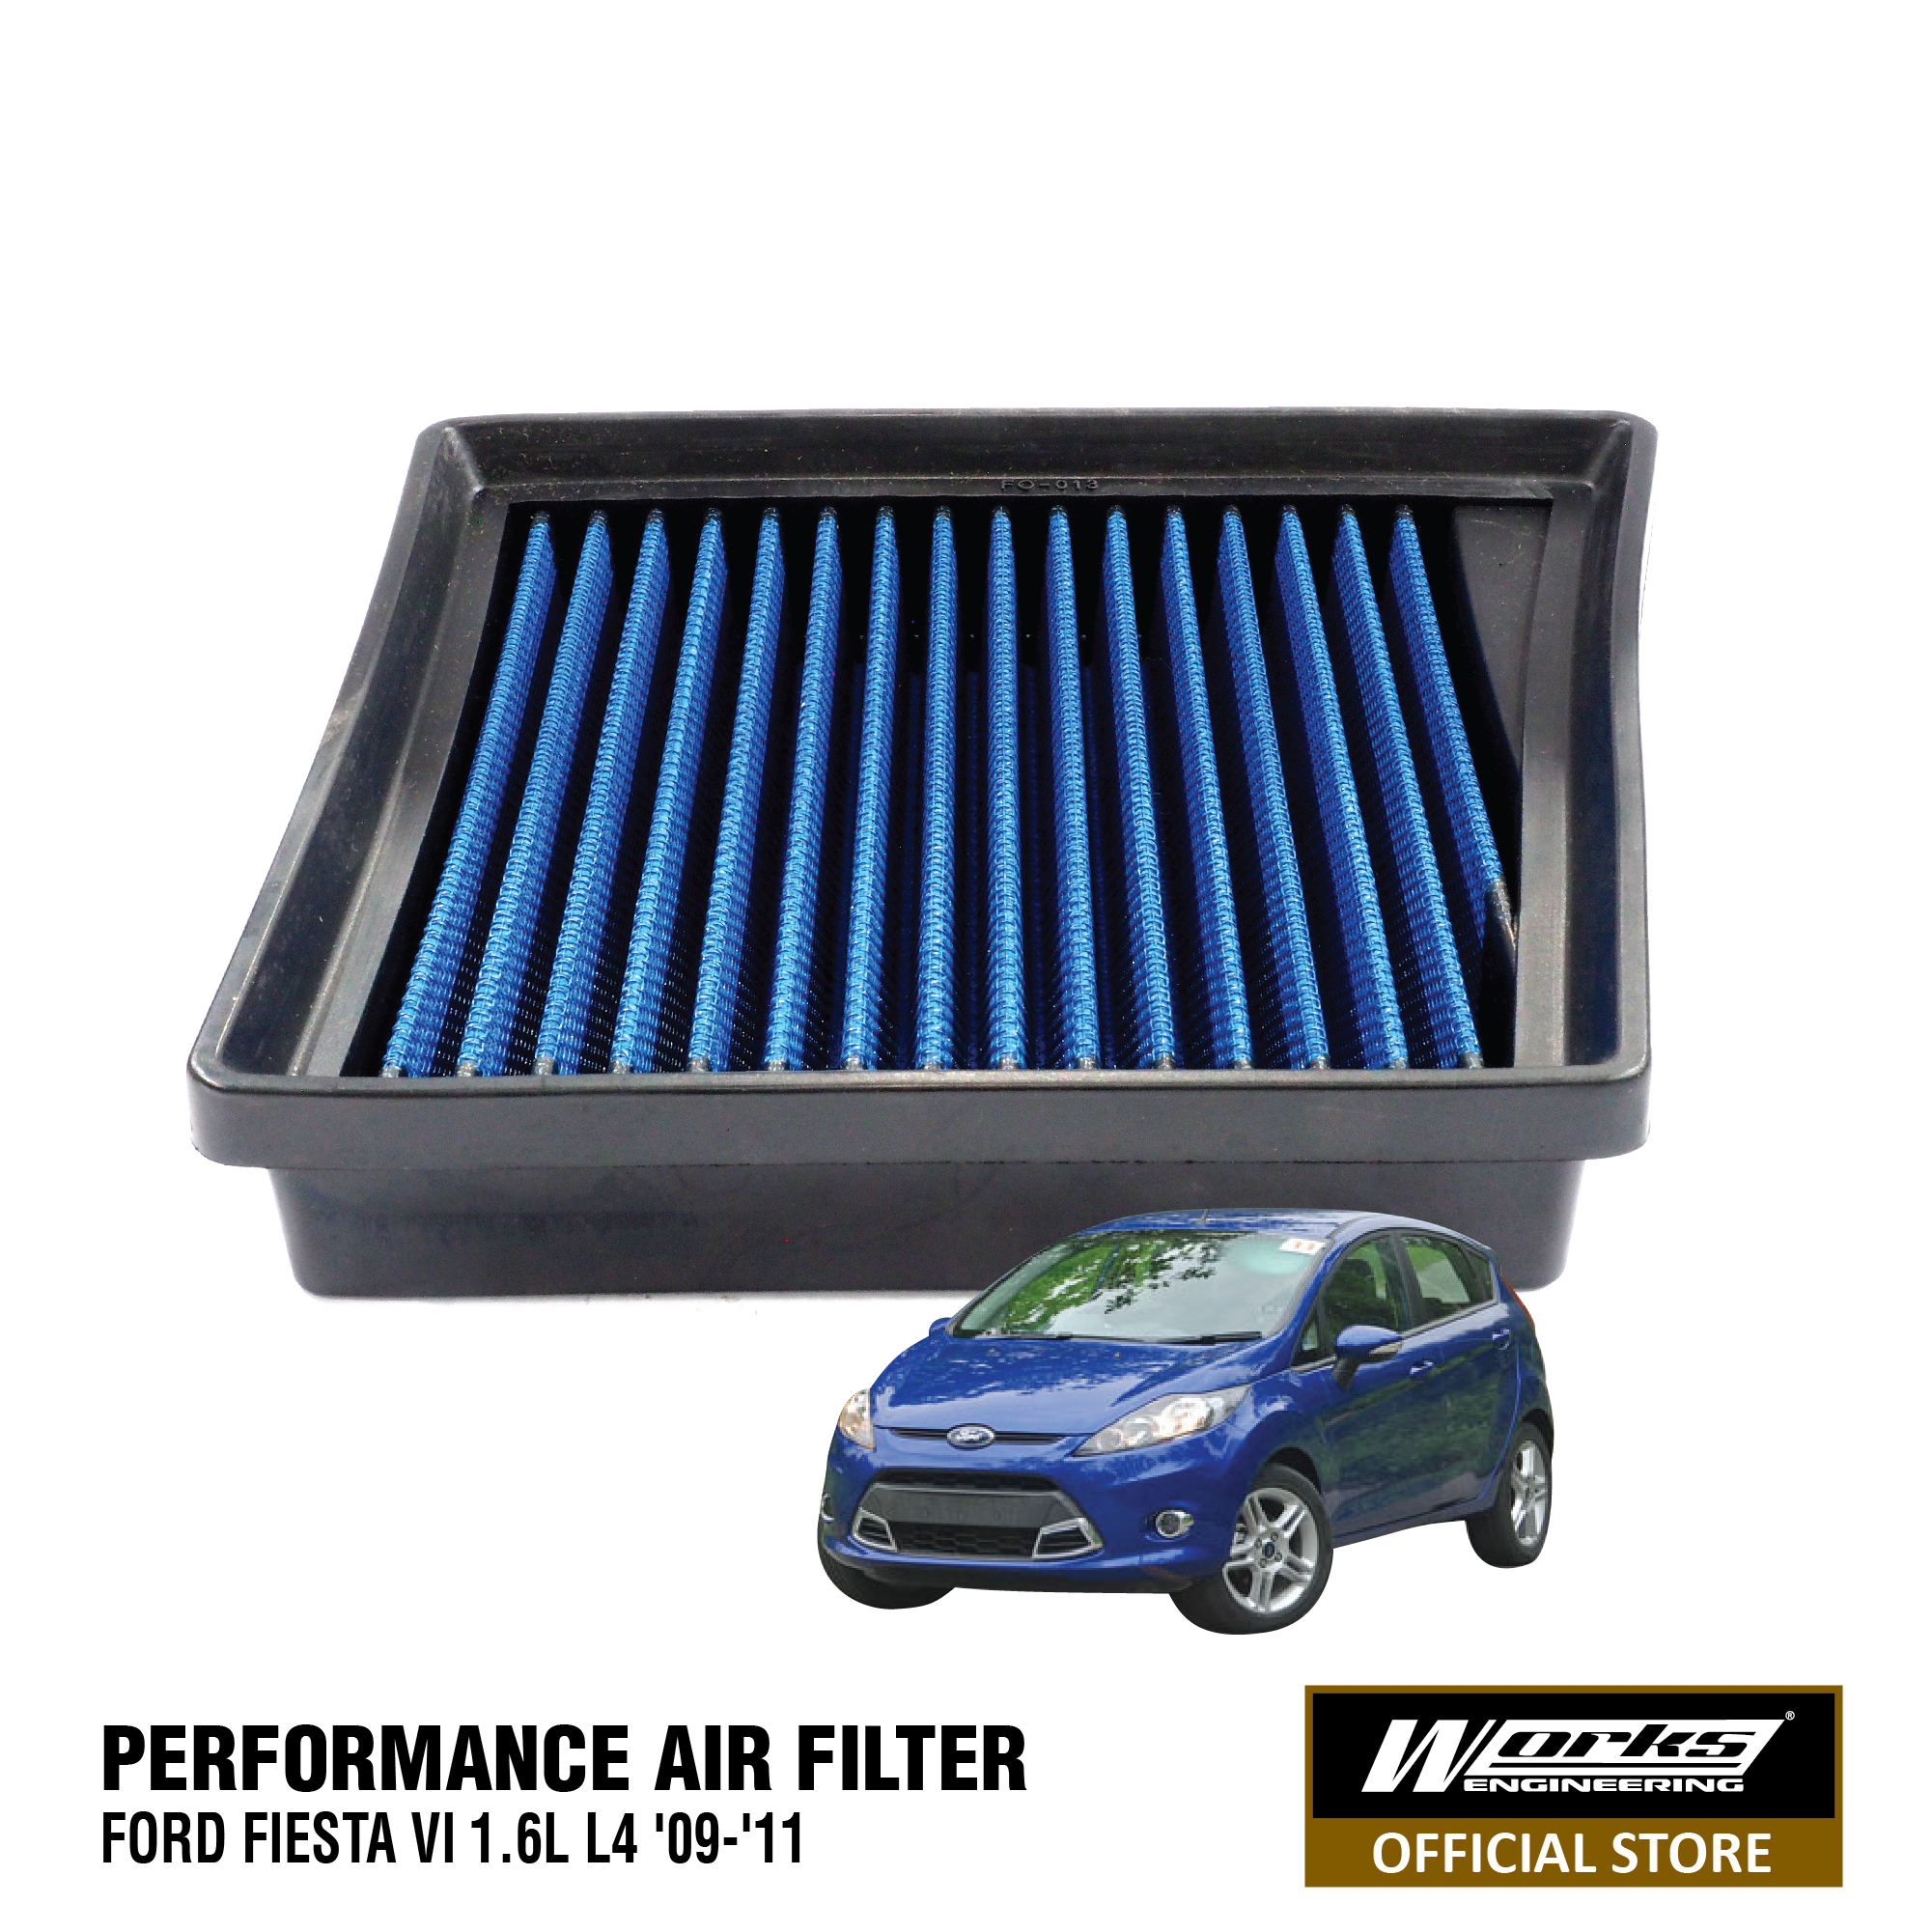 Works Air Filter - Ford Fiesta VI 1.6L L4 '09-'11 – Works Engineering  Official Online Store